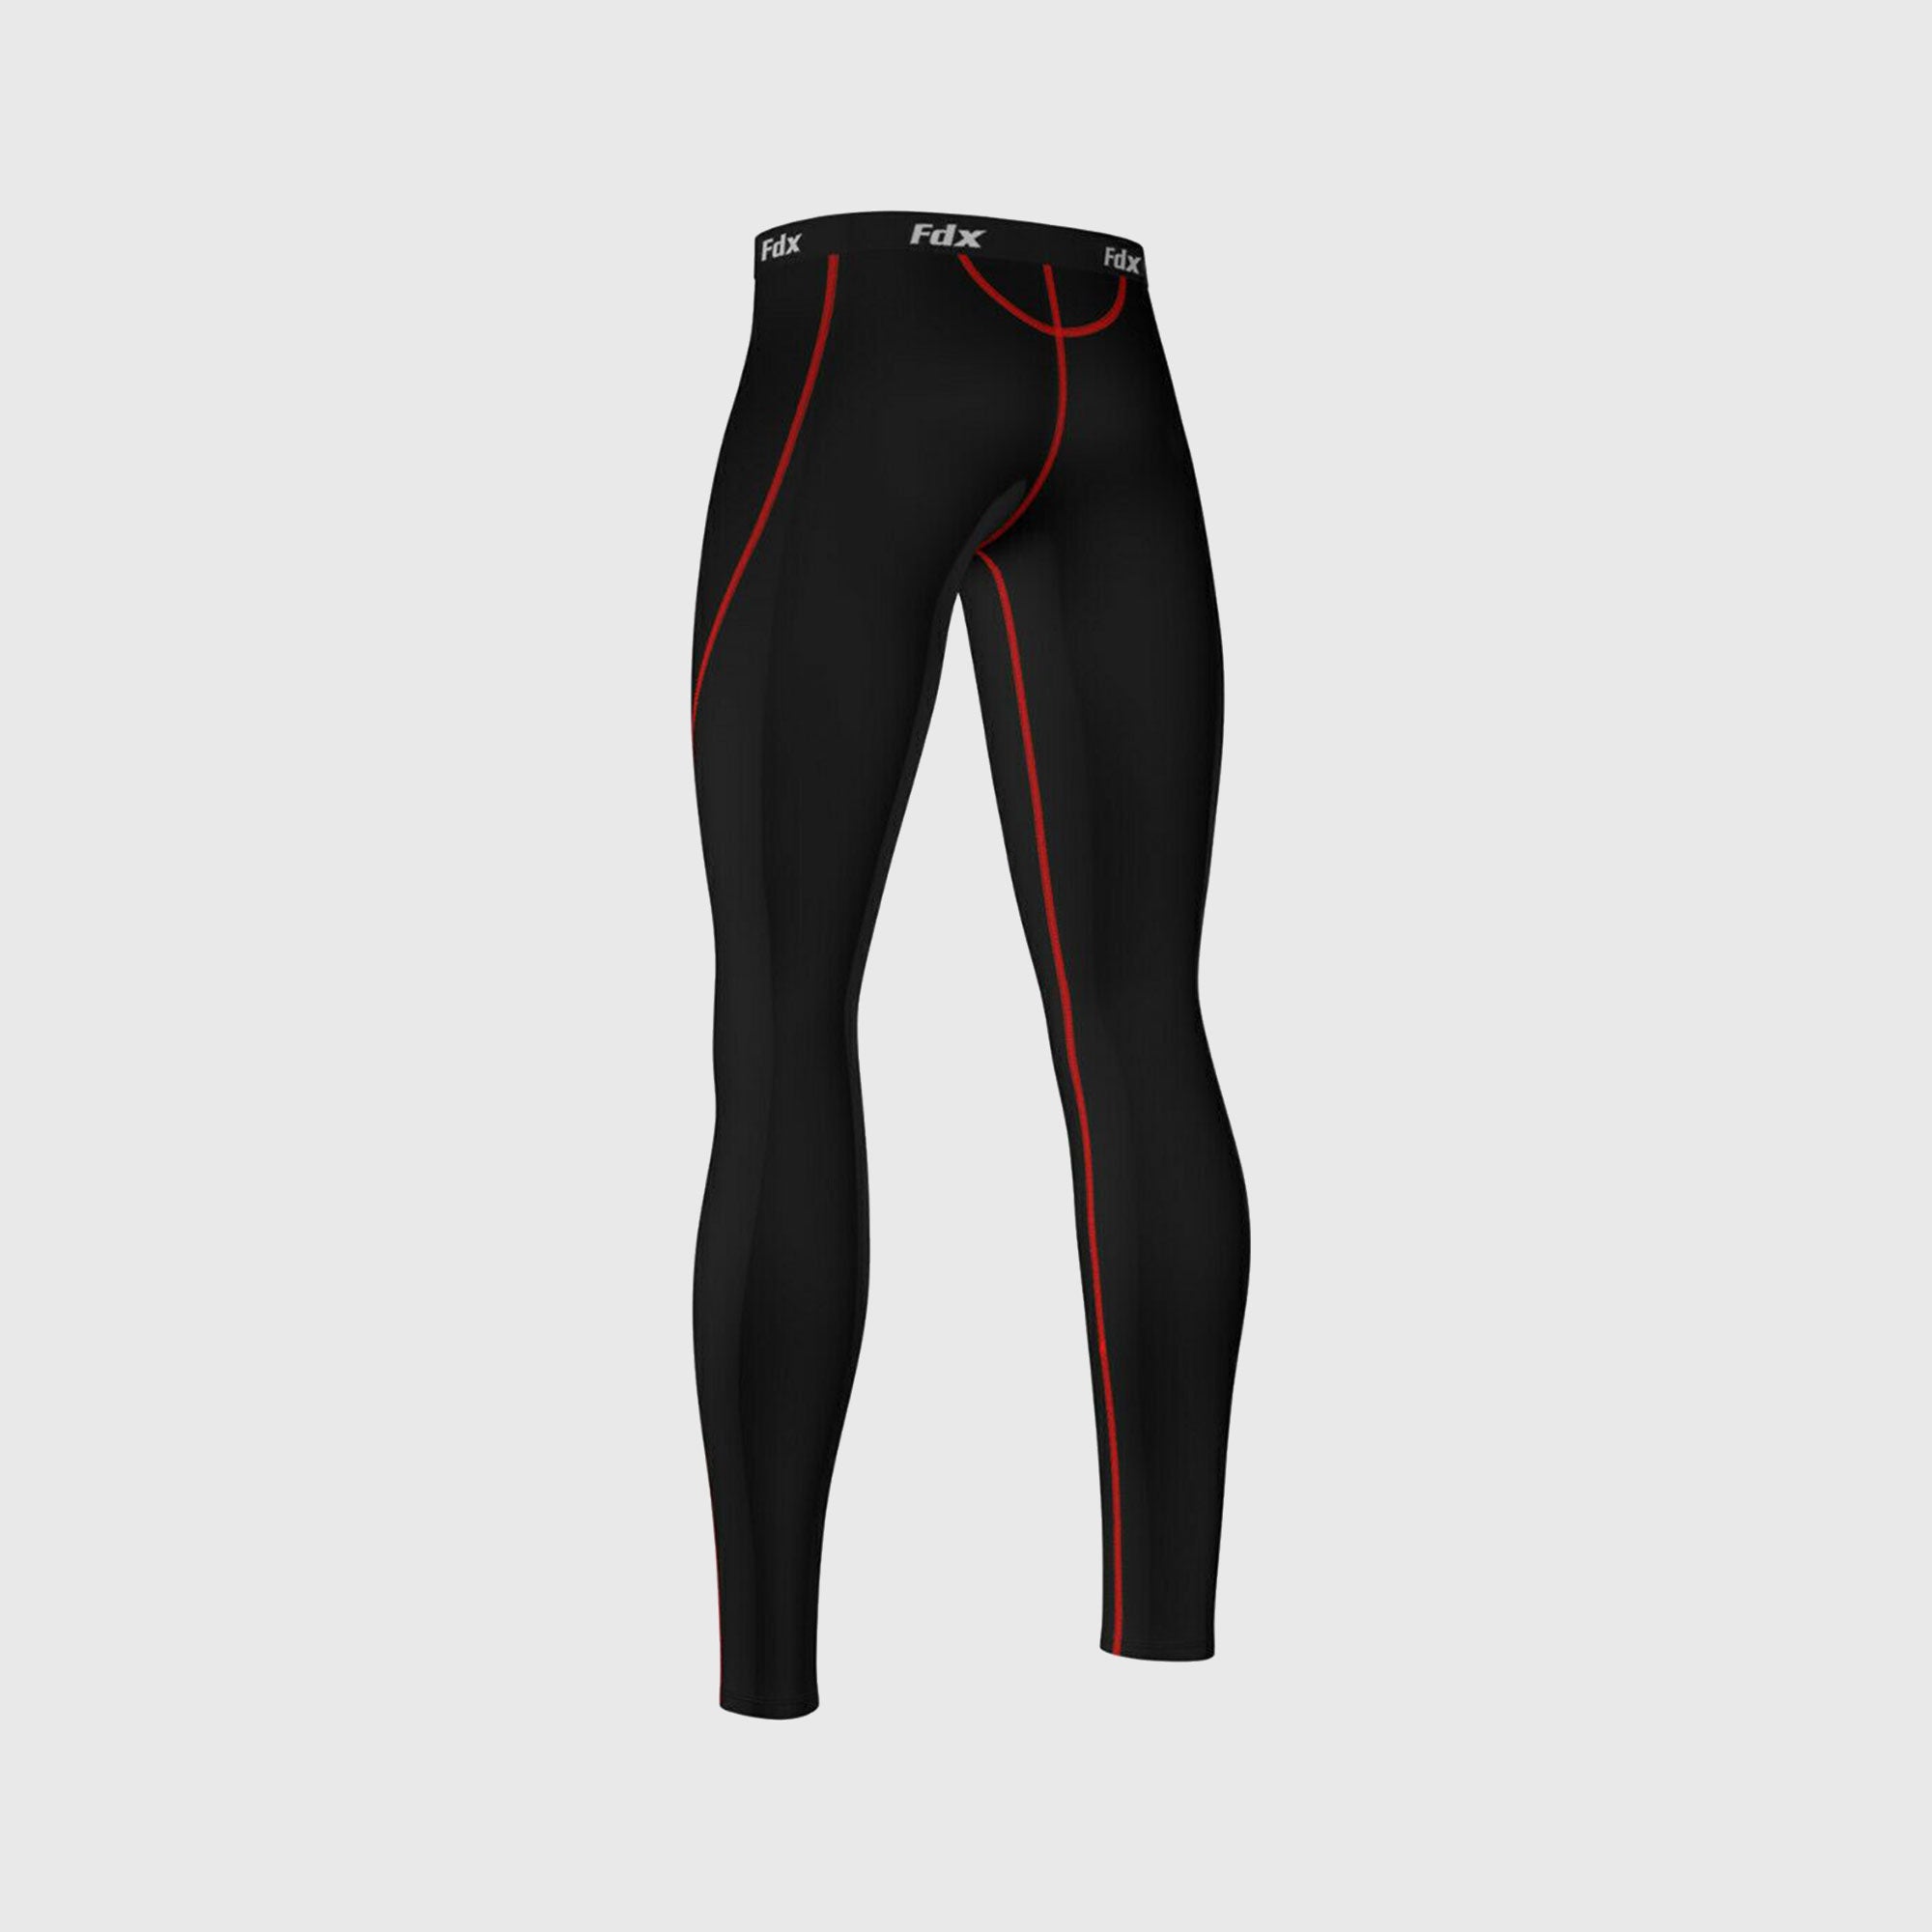 Fdx Thermolinx Men's Thermal All Season Compression Tights Red